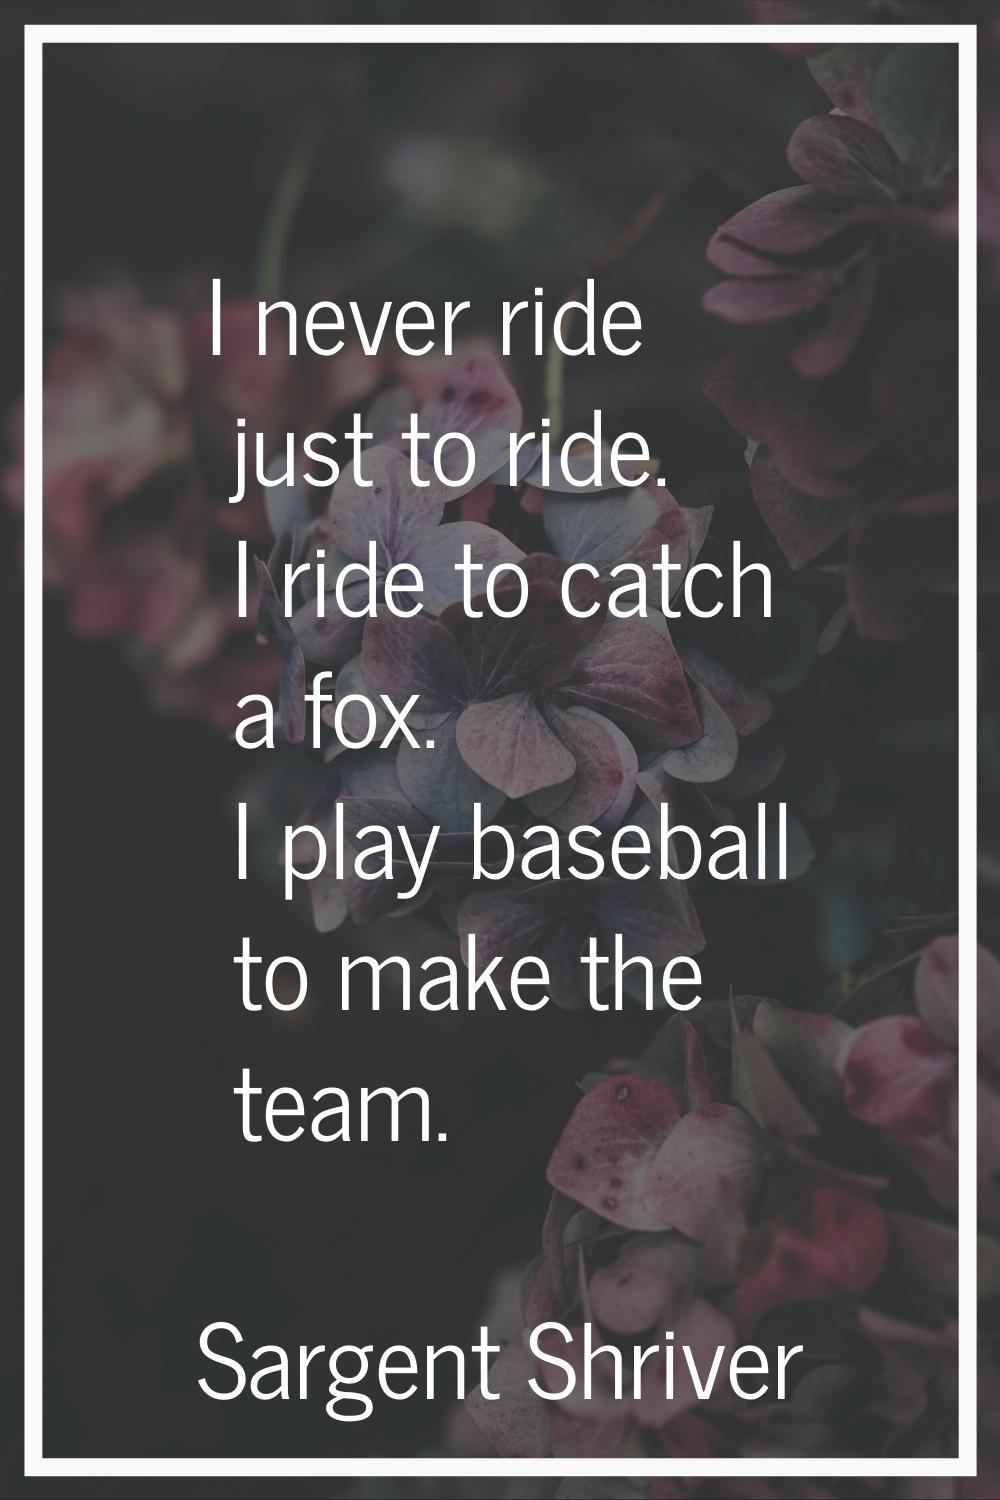 I never ride just to ride. I ride to catch a fox. I play baseball to make the team.